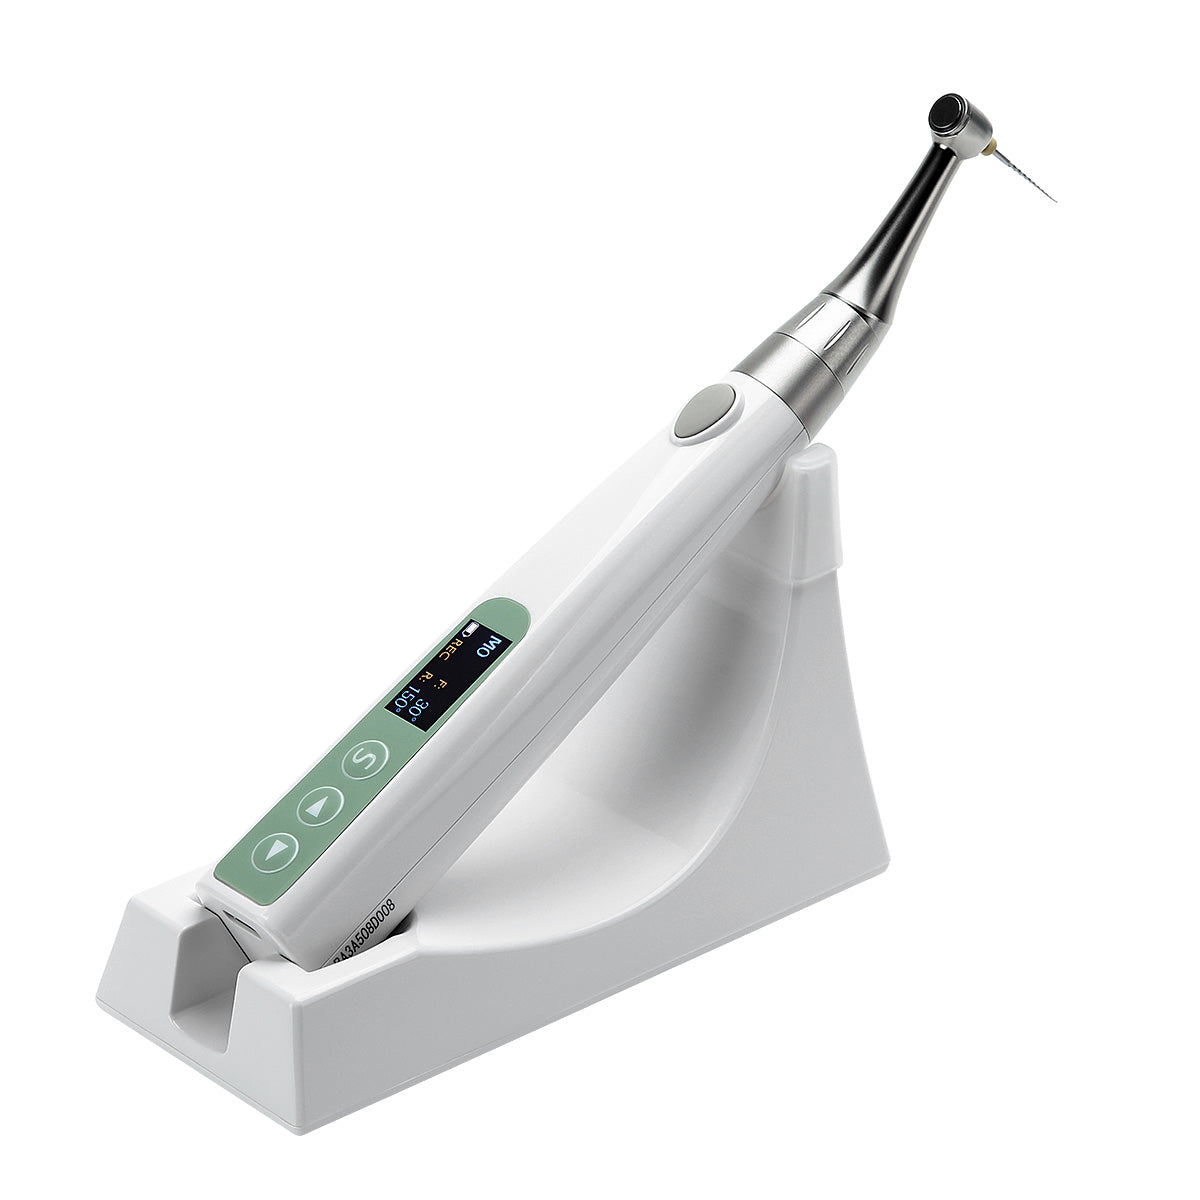 2 In 1 Wireless Endo Motor With Builtin Apex Locator 360° Adjustable LED Screen - pairaydental.com